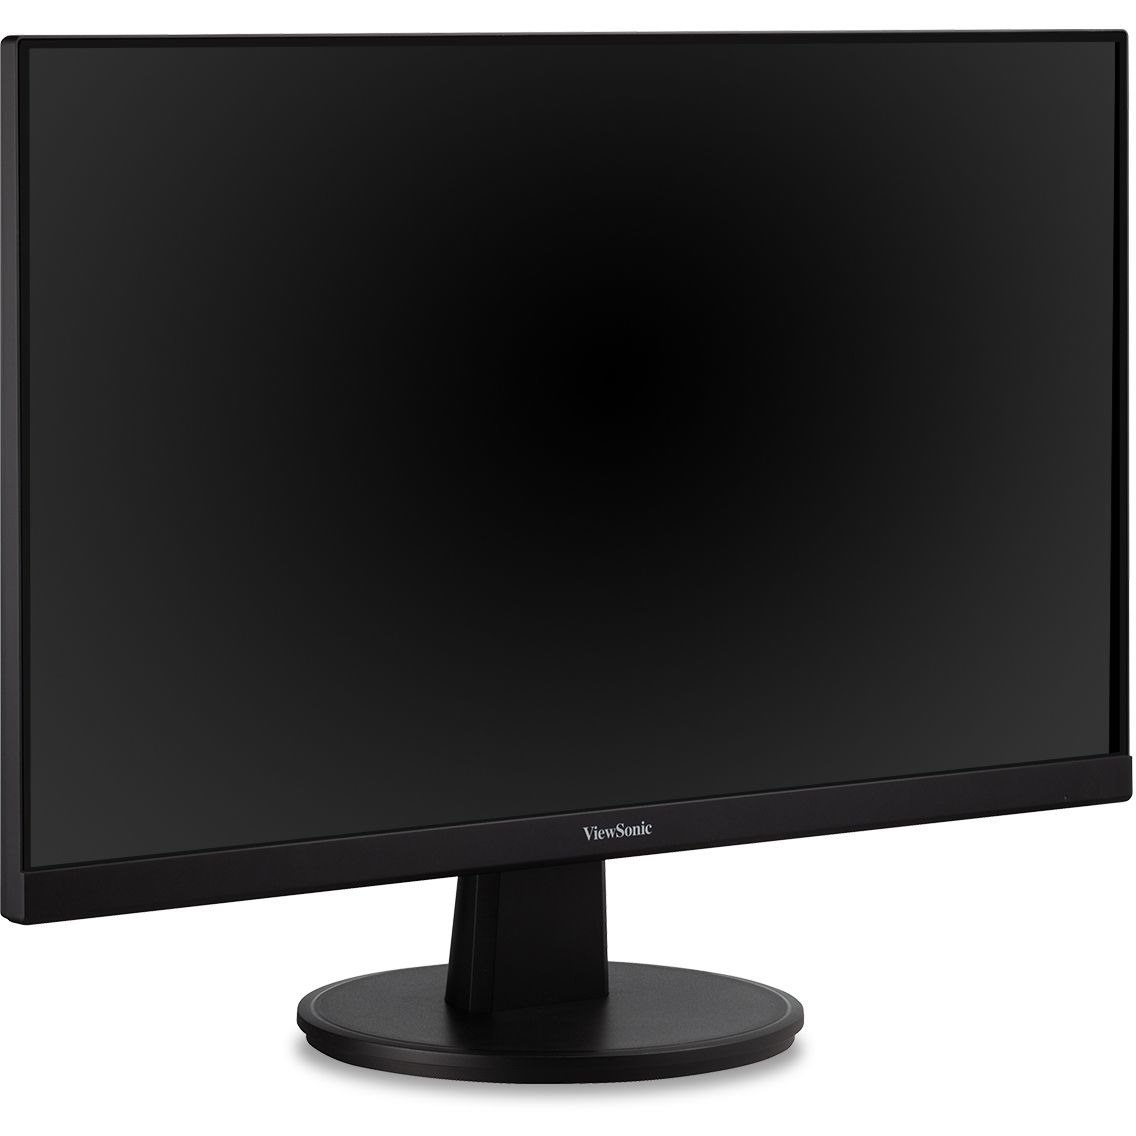 ViewSonic VA2447-MHU 24 Inch Full HD 1080p USB C Monitor with Ultra-Thin Bezel, AMD FreeSync, 100Hz, Eye Care, 15W Charging, HDMI, and VGA Inputs for Home and Office